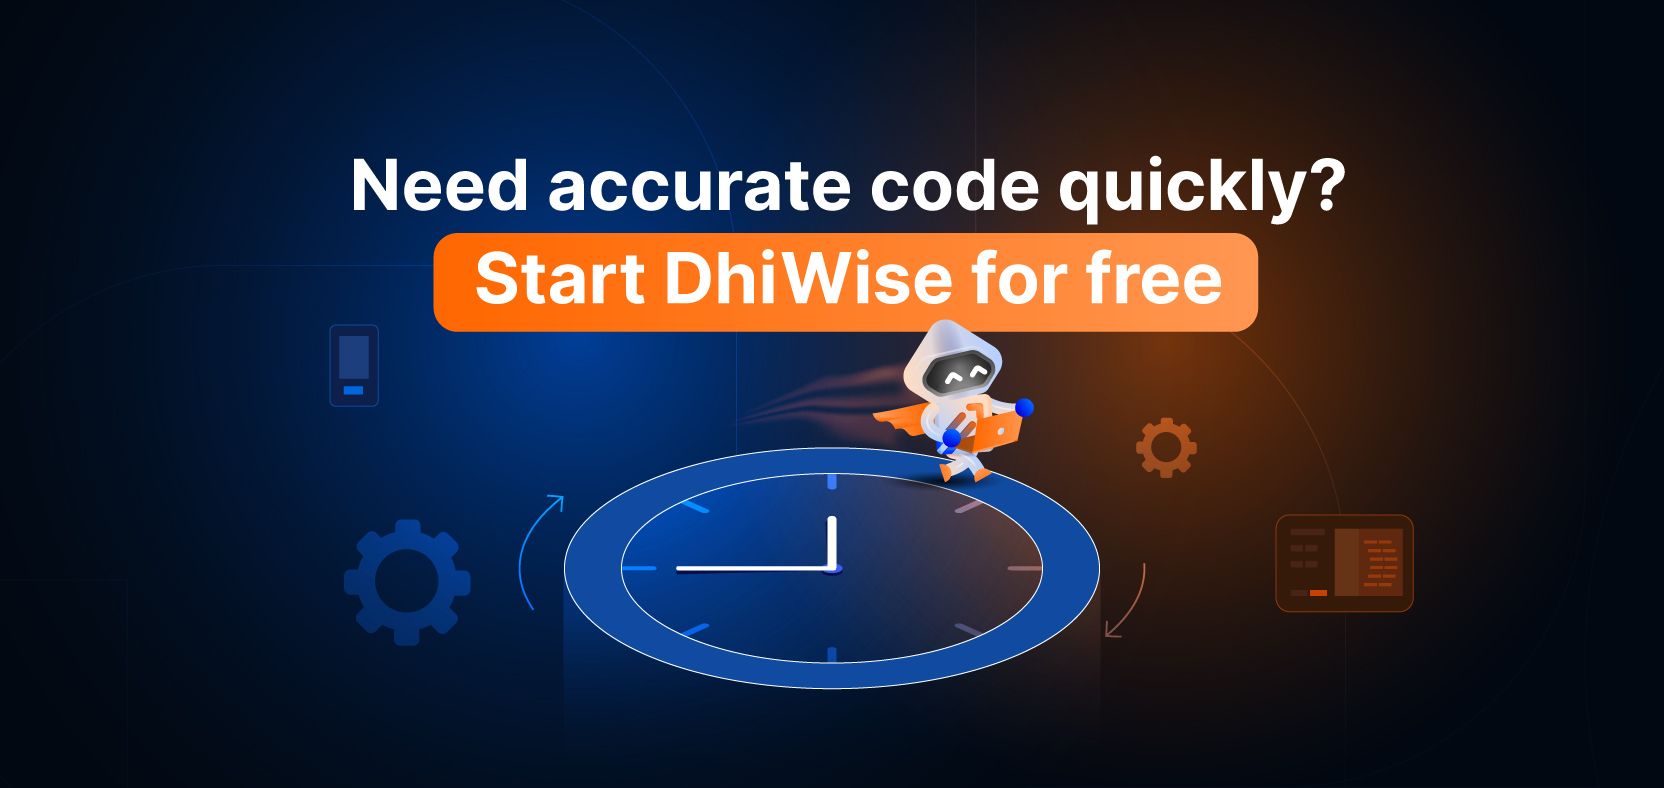 Sign up to DhiWise for free